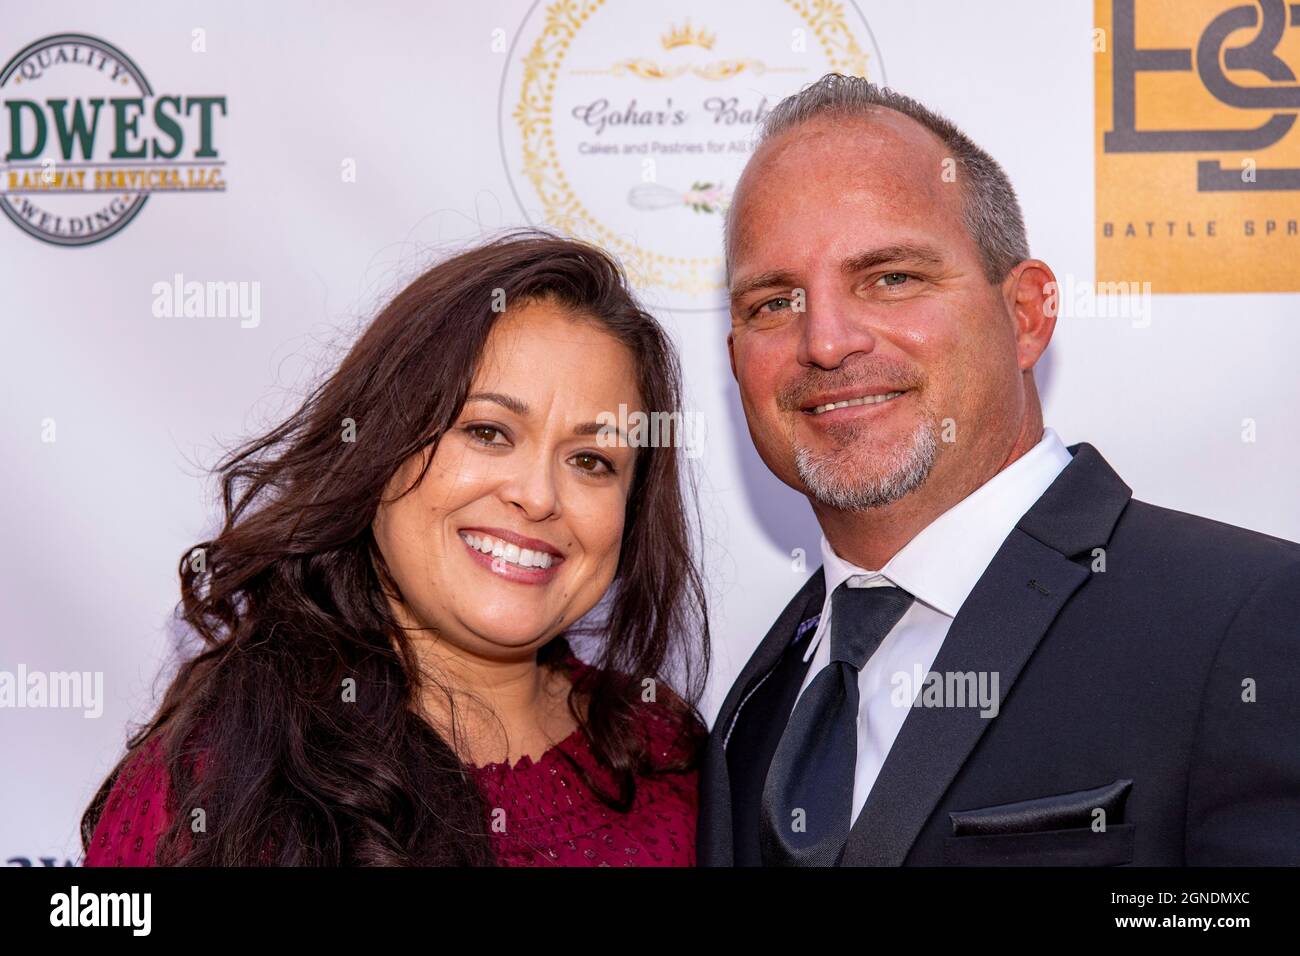 Los Angeles, USA. 24th Sep, 2021. Leilani Turner with husband attends  Suzanne DeLaurentiis Productions Hosts "Celebrate, Honor, Remember"  Luncheon at Luxe Hotel, Los Angeles, CA on September 24, 2021 Credit:  Eugene Powers/Alamy